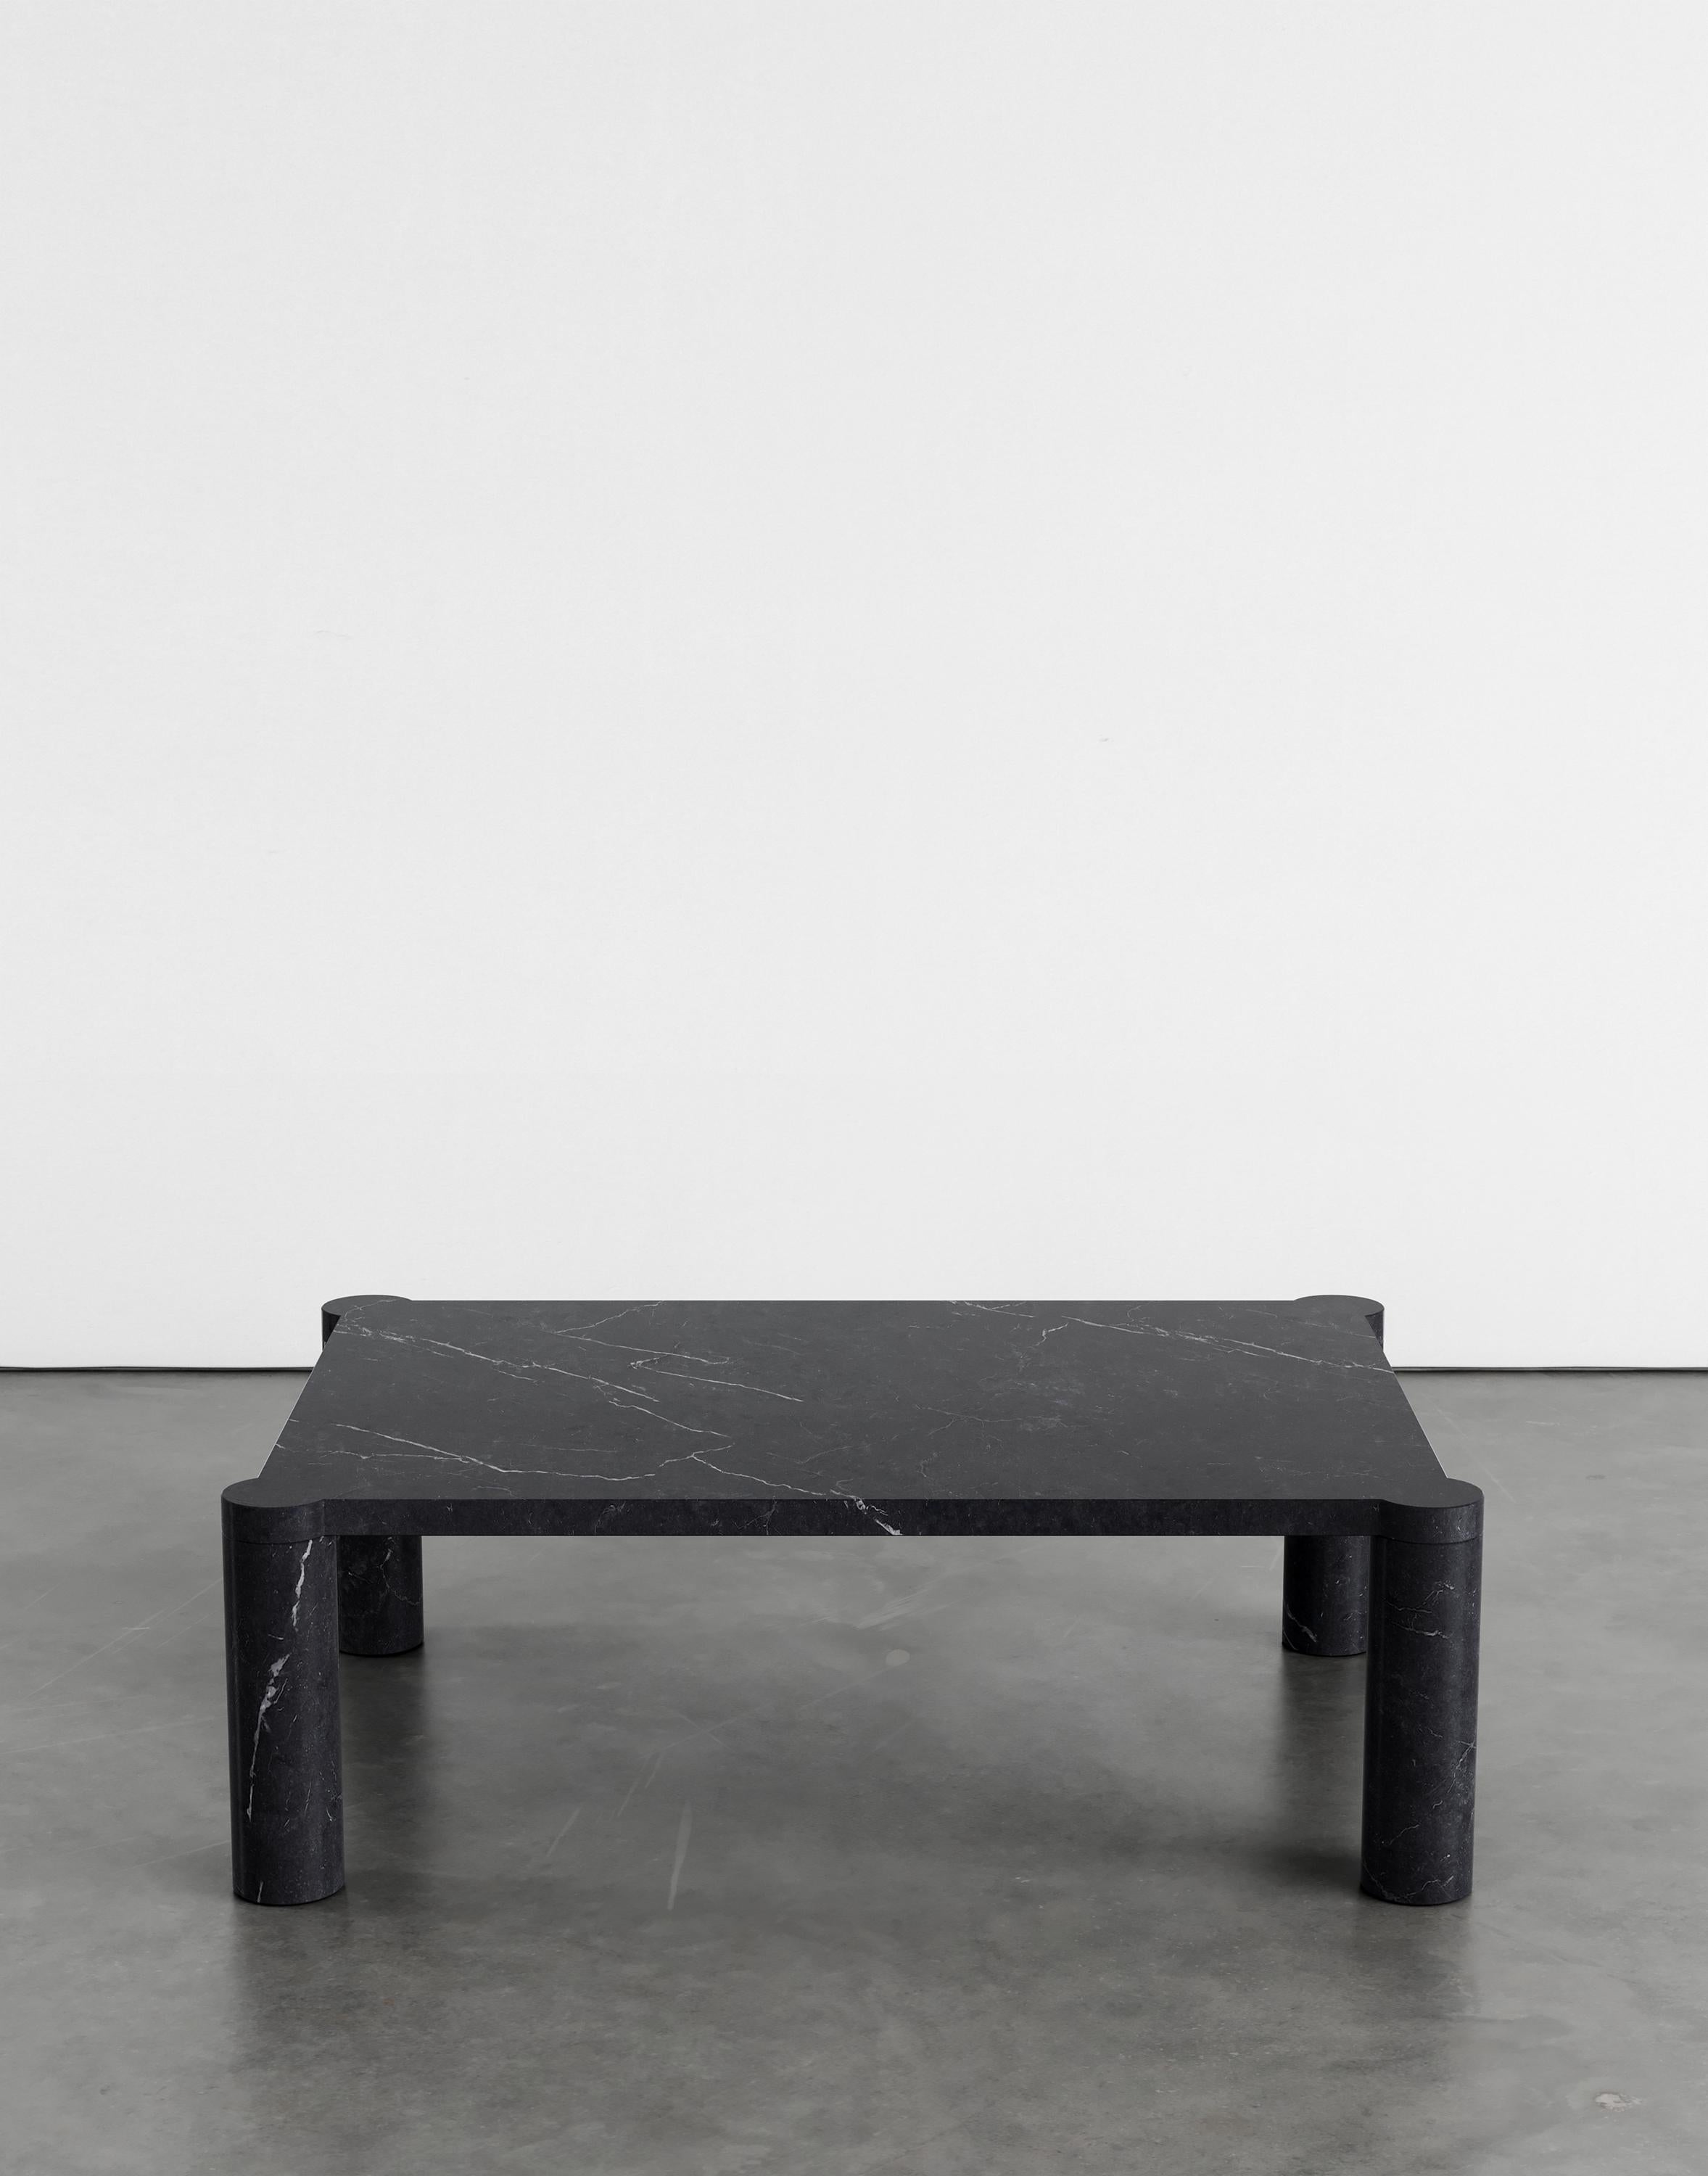 Alessio 107 coffee table by Agglomerati.
Dimensions: D 100 x W 70 x H 33 cm.
Materials: Nero Marquina marble.
Available in other stones. 

Alessio is a coffee table enclosed by four cylindrical legs which sit seamlessly flush under the